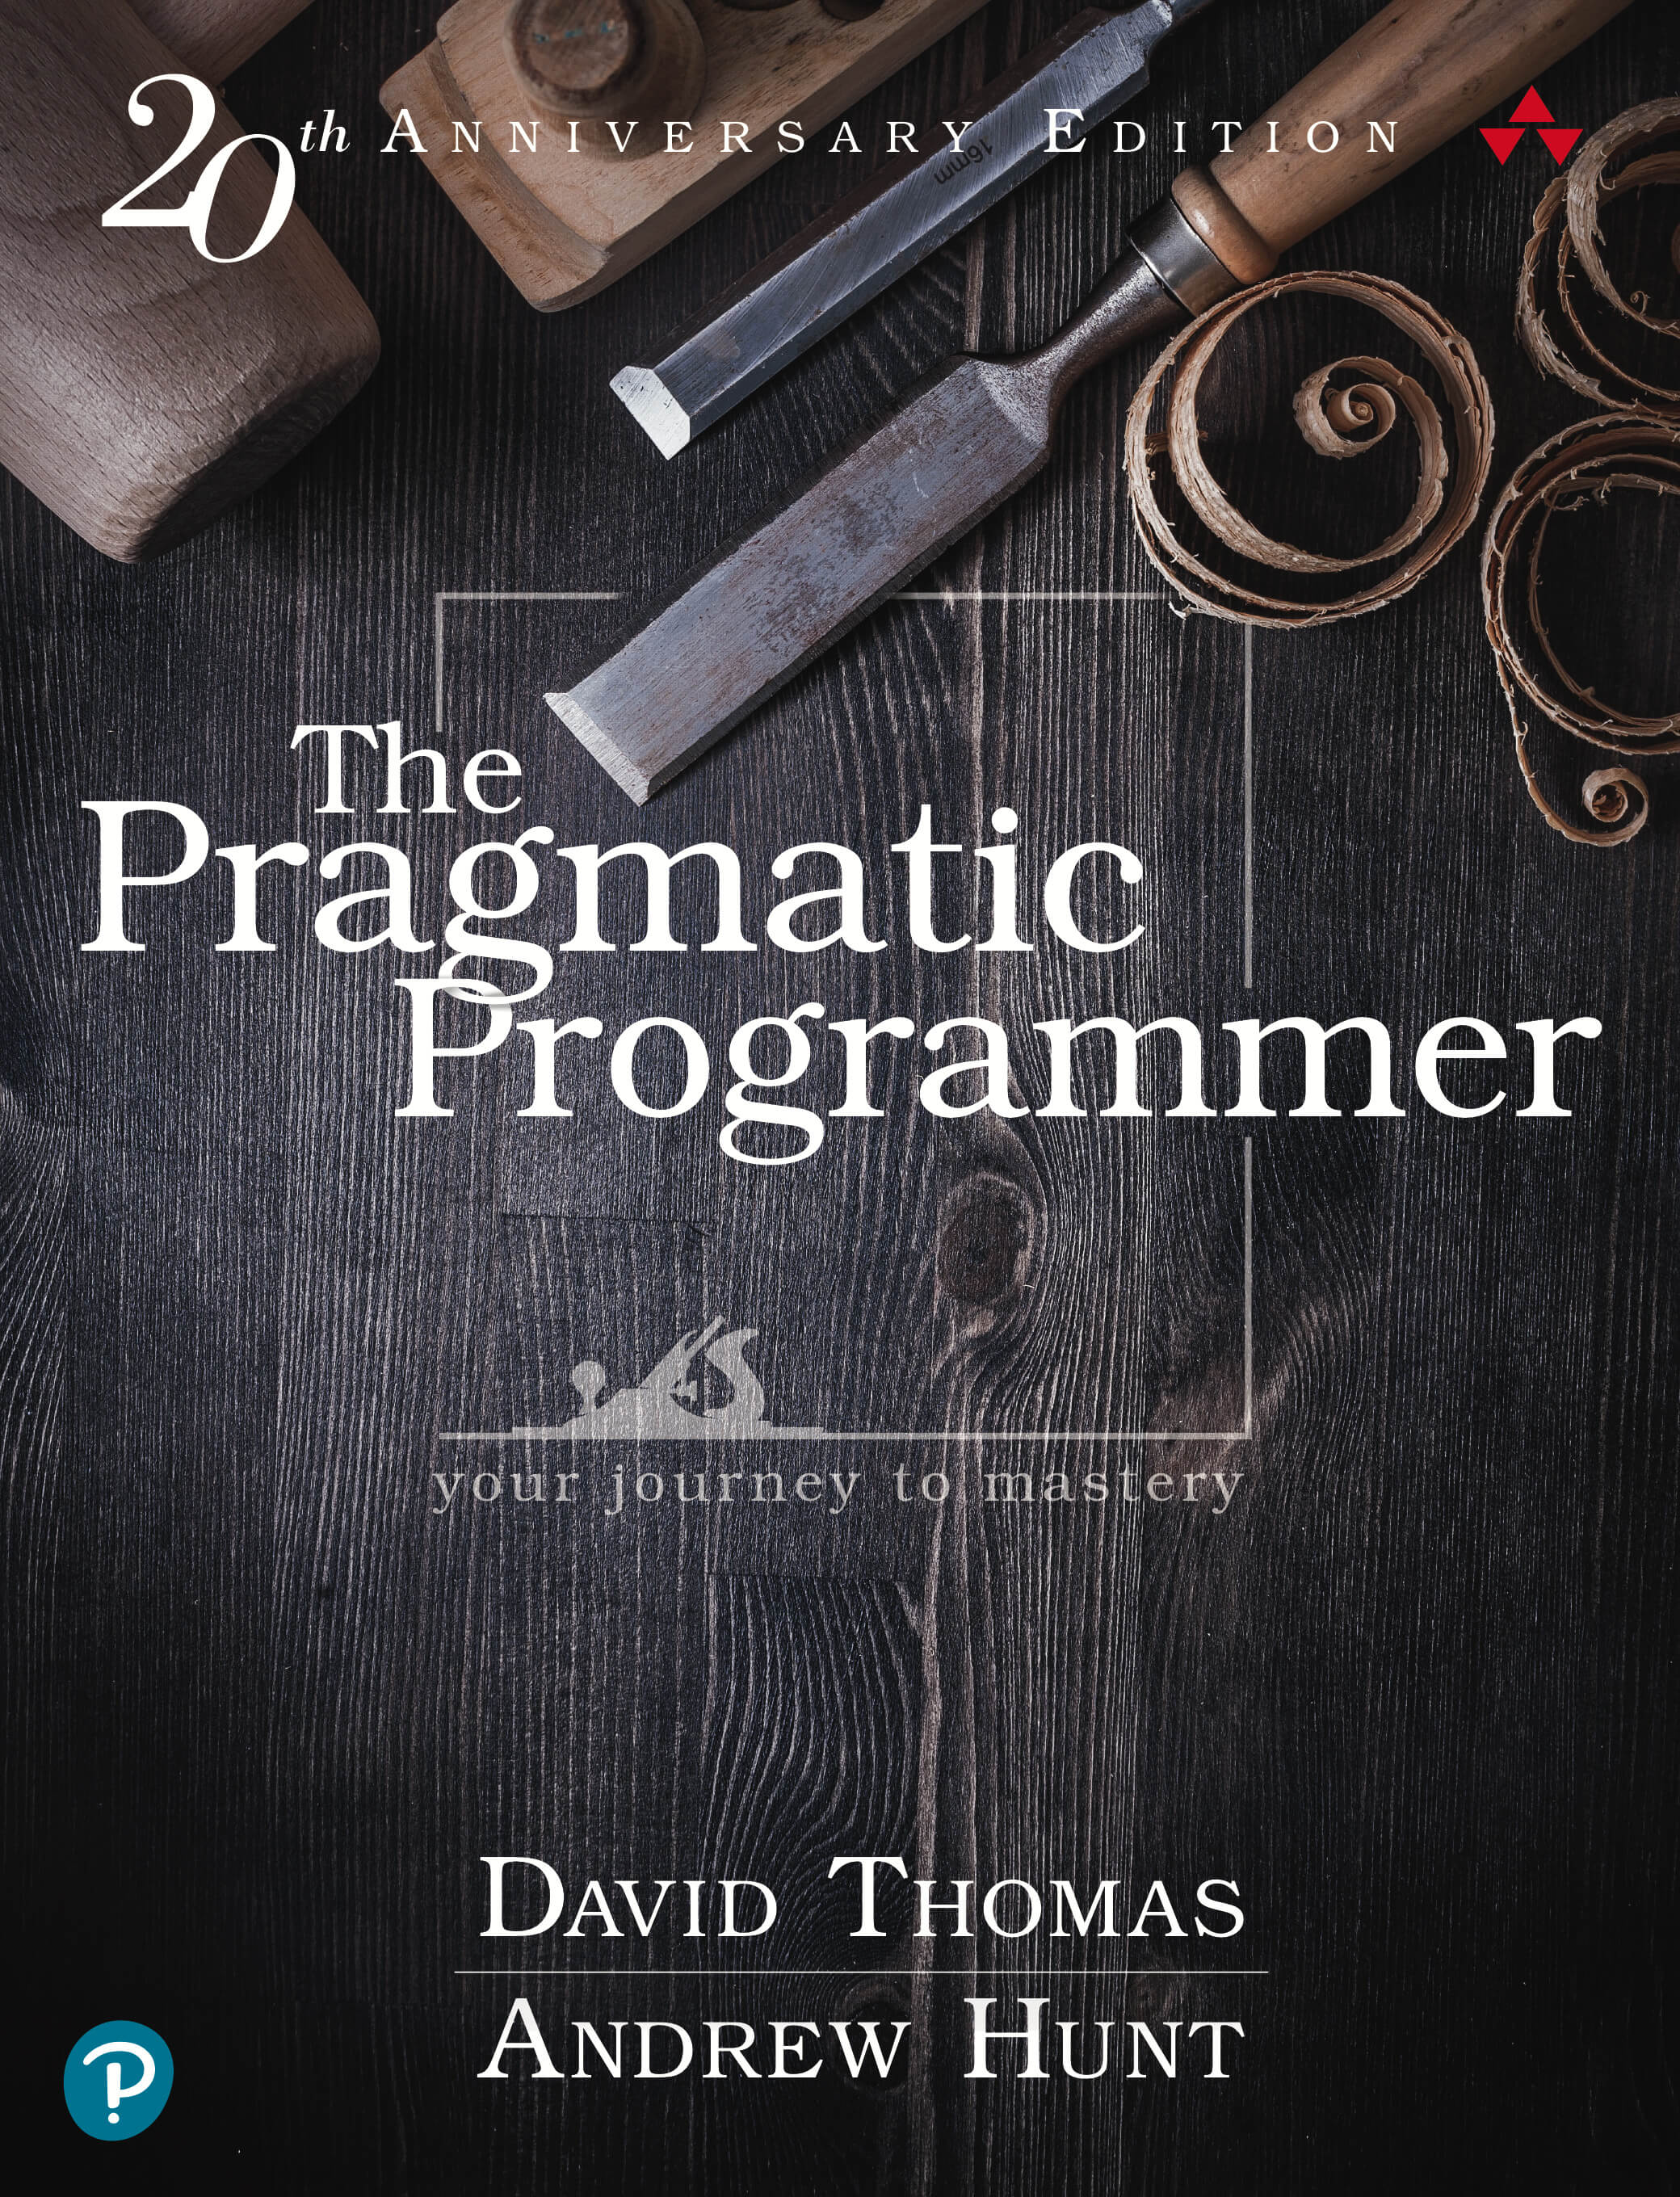 The Pragmatic Programmer - Your Journey to Mastery By David Thomas and Andrew Hunt